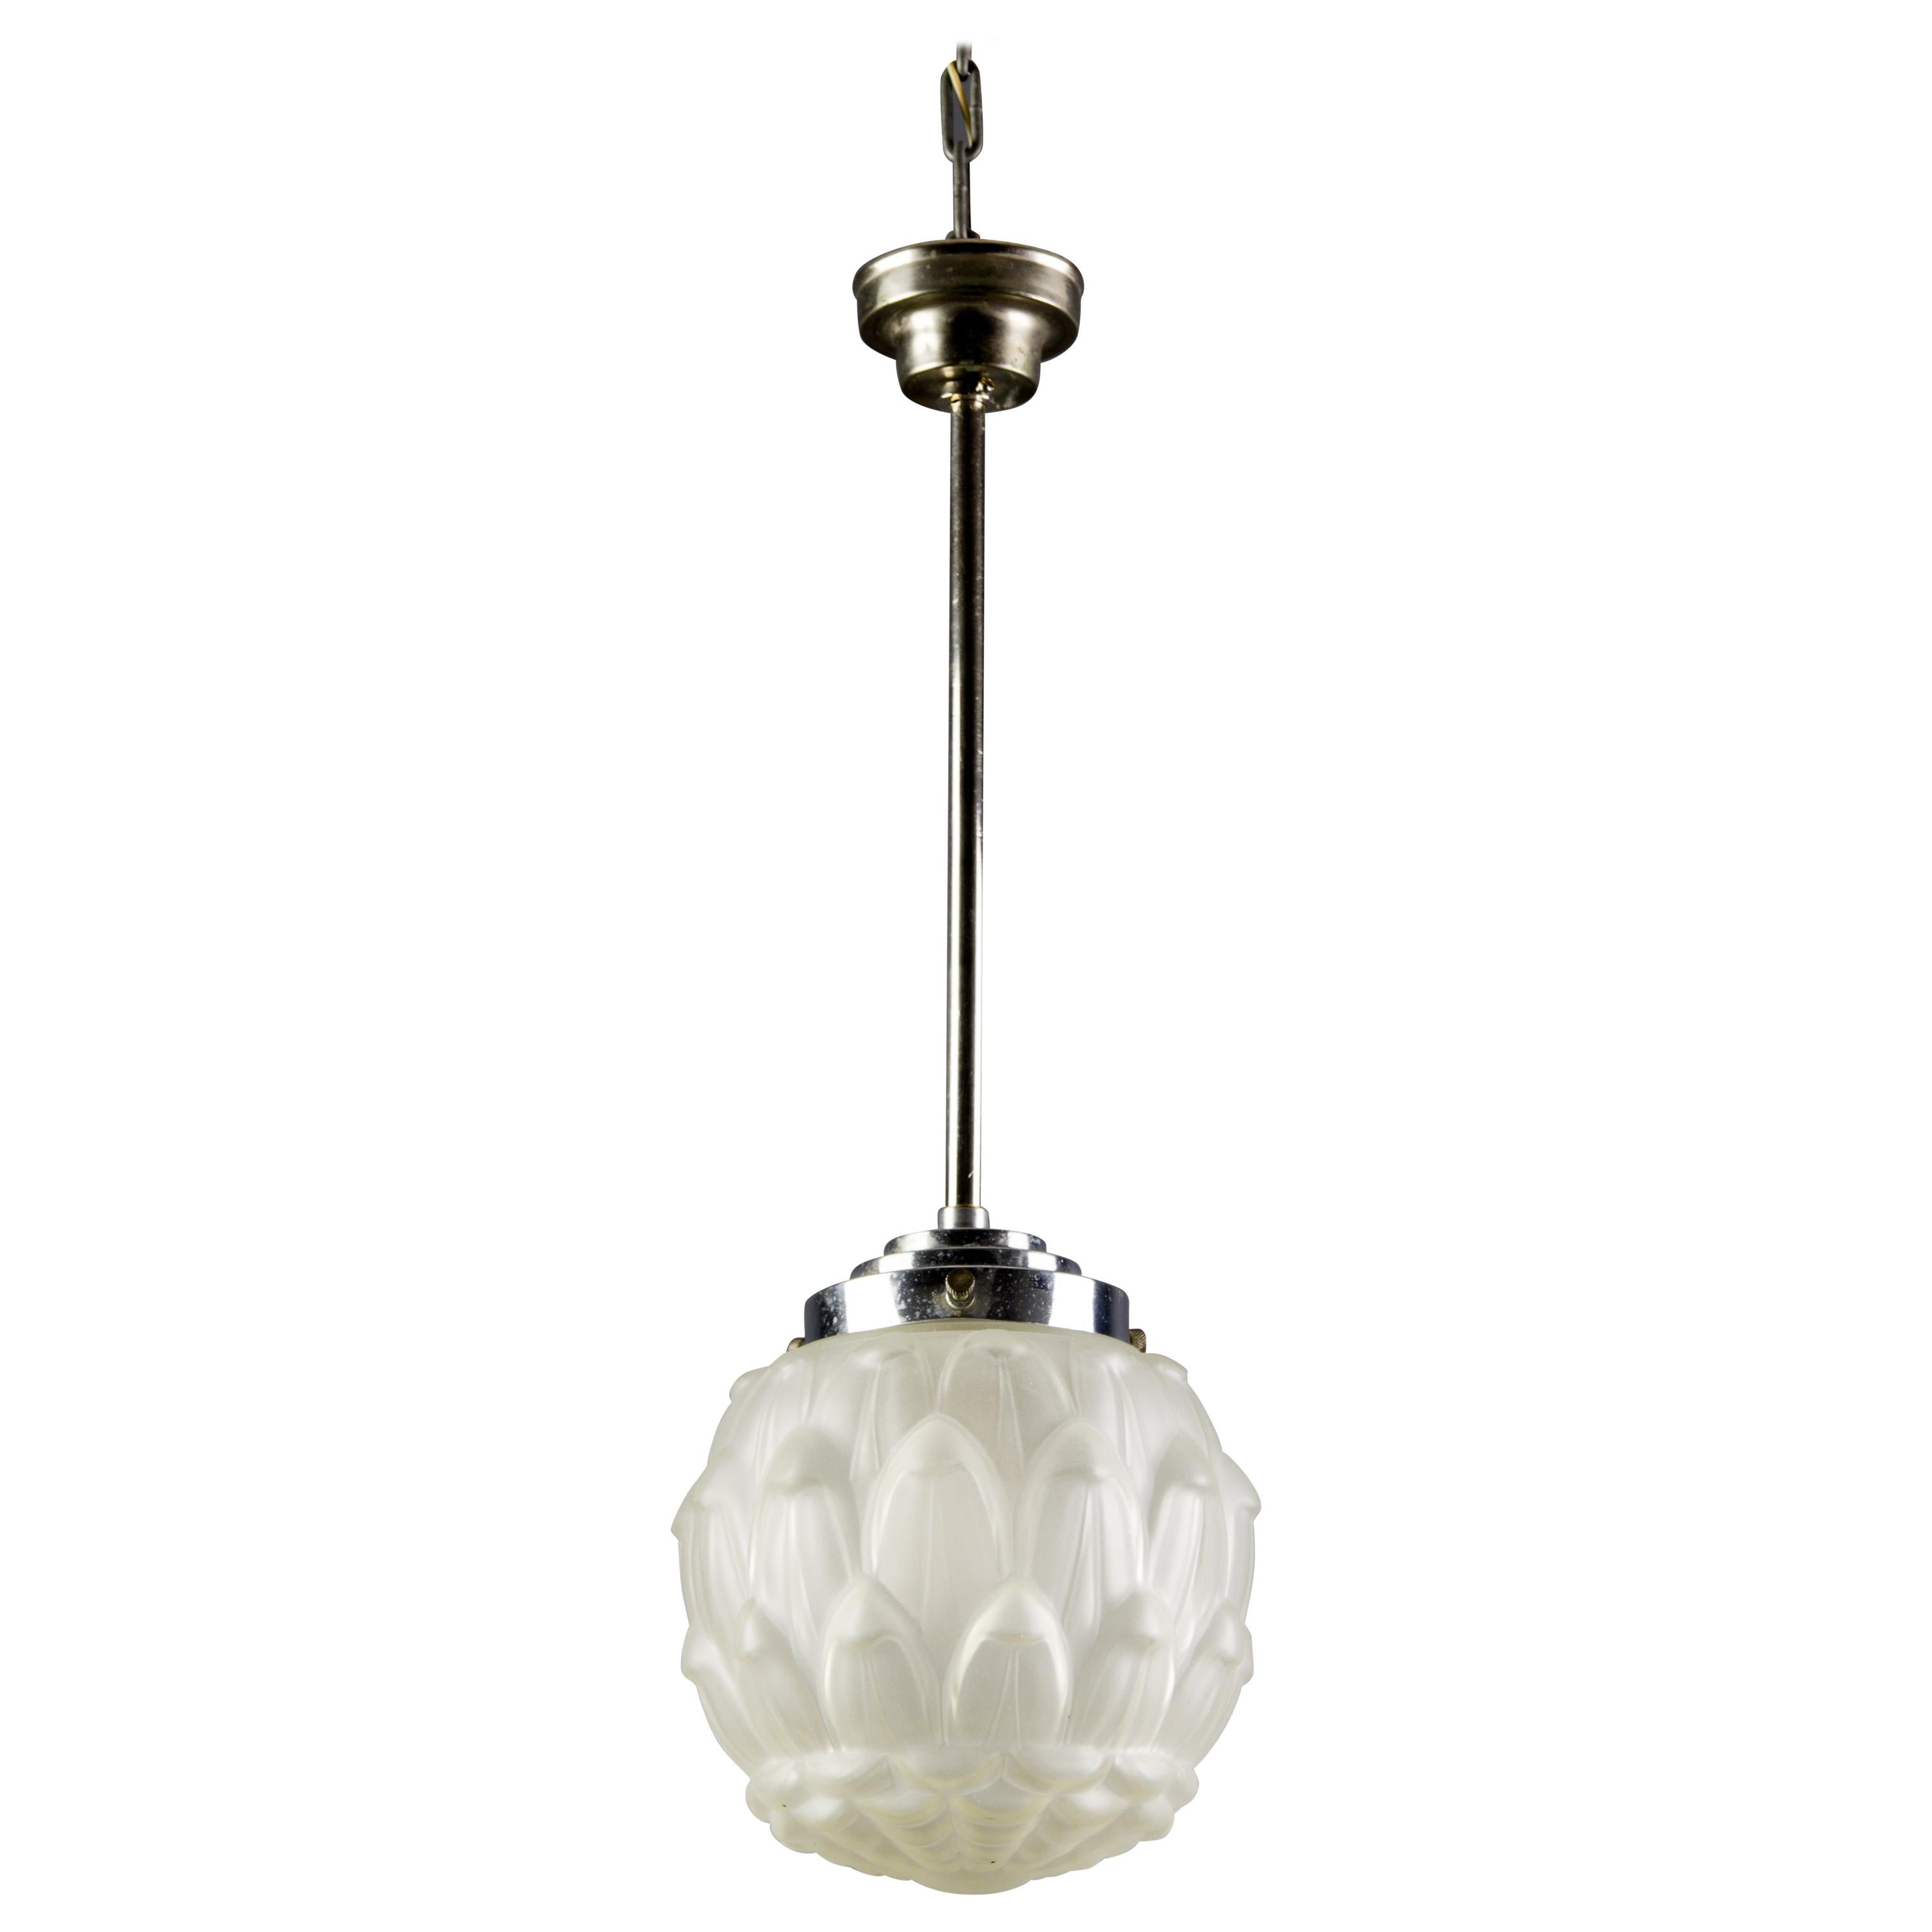 Art Deco White Frosted Glass and Chrome Pendant Ceiling Light, 1930s